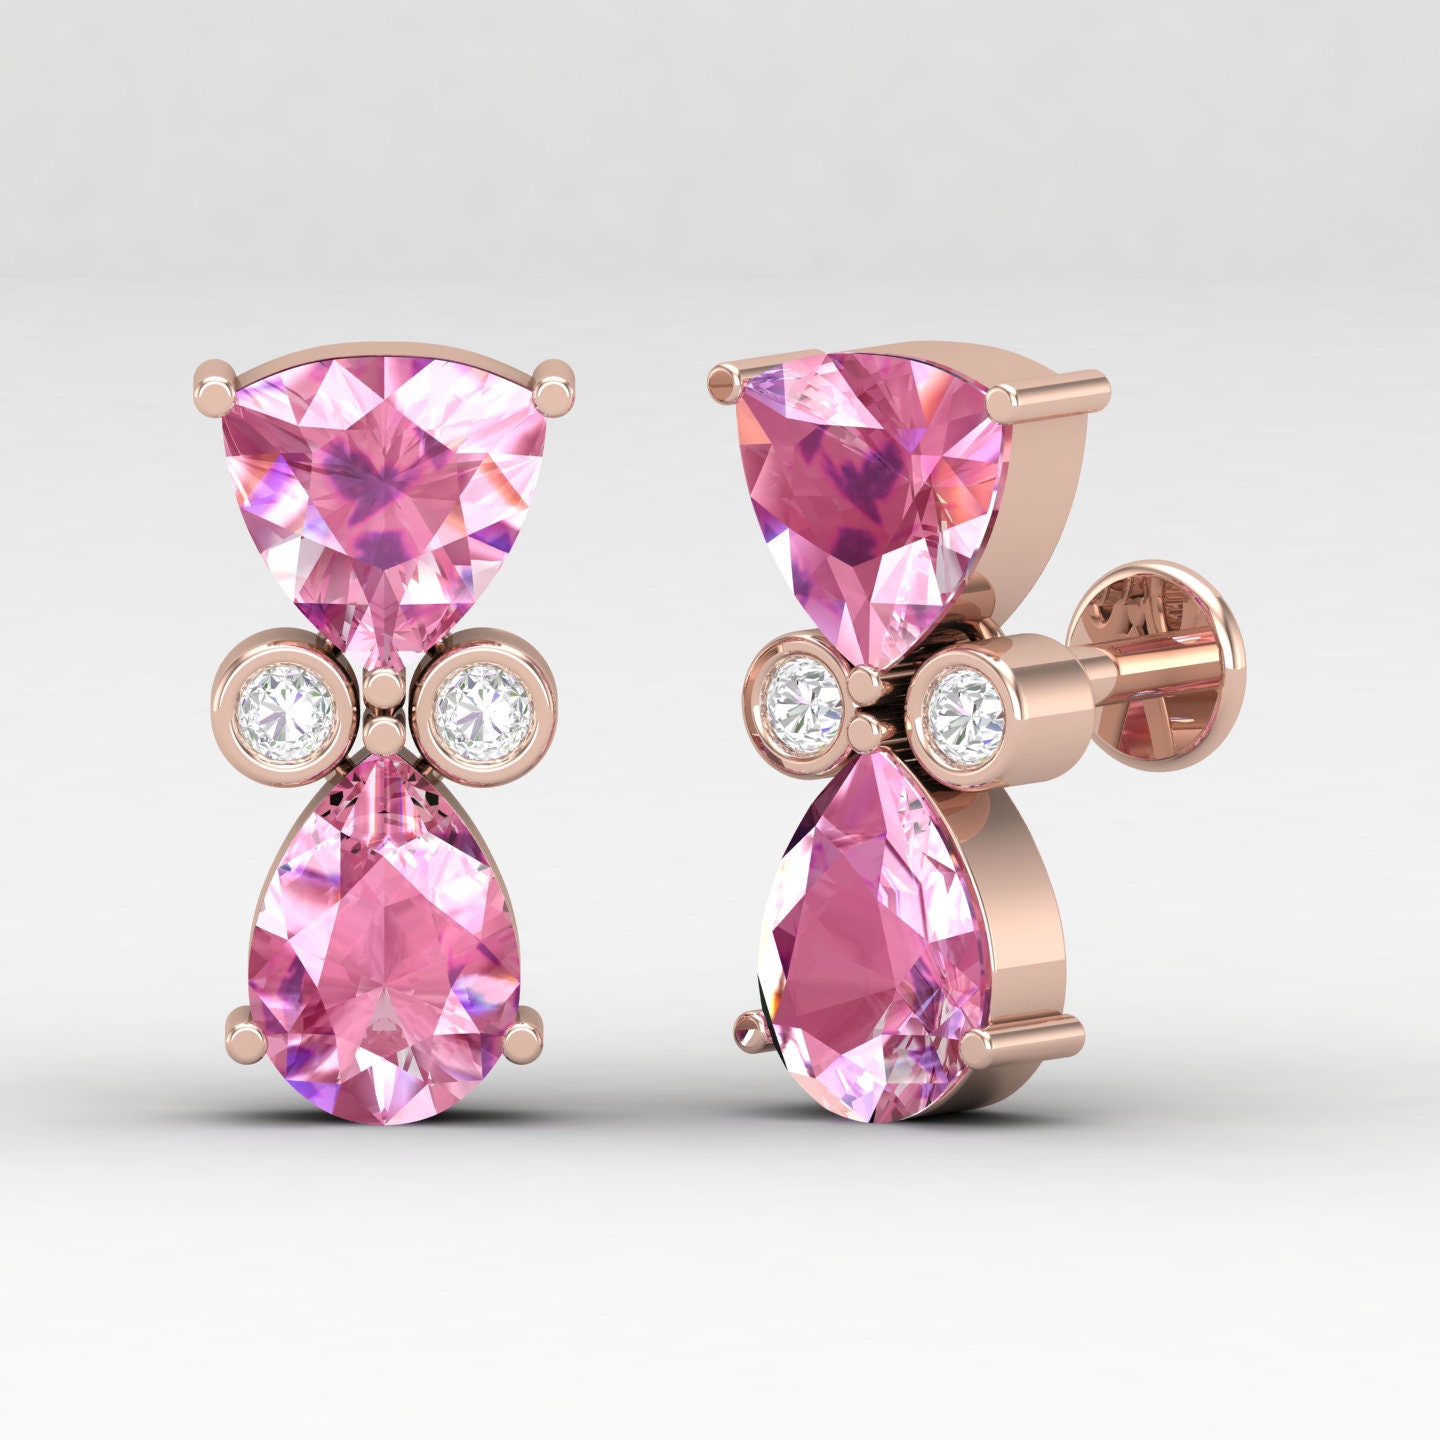 14K Yellow Gold Diamond and Pink Spinel Earrings